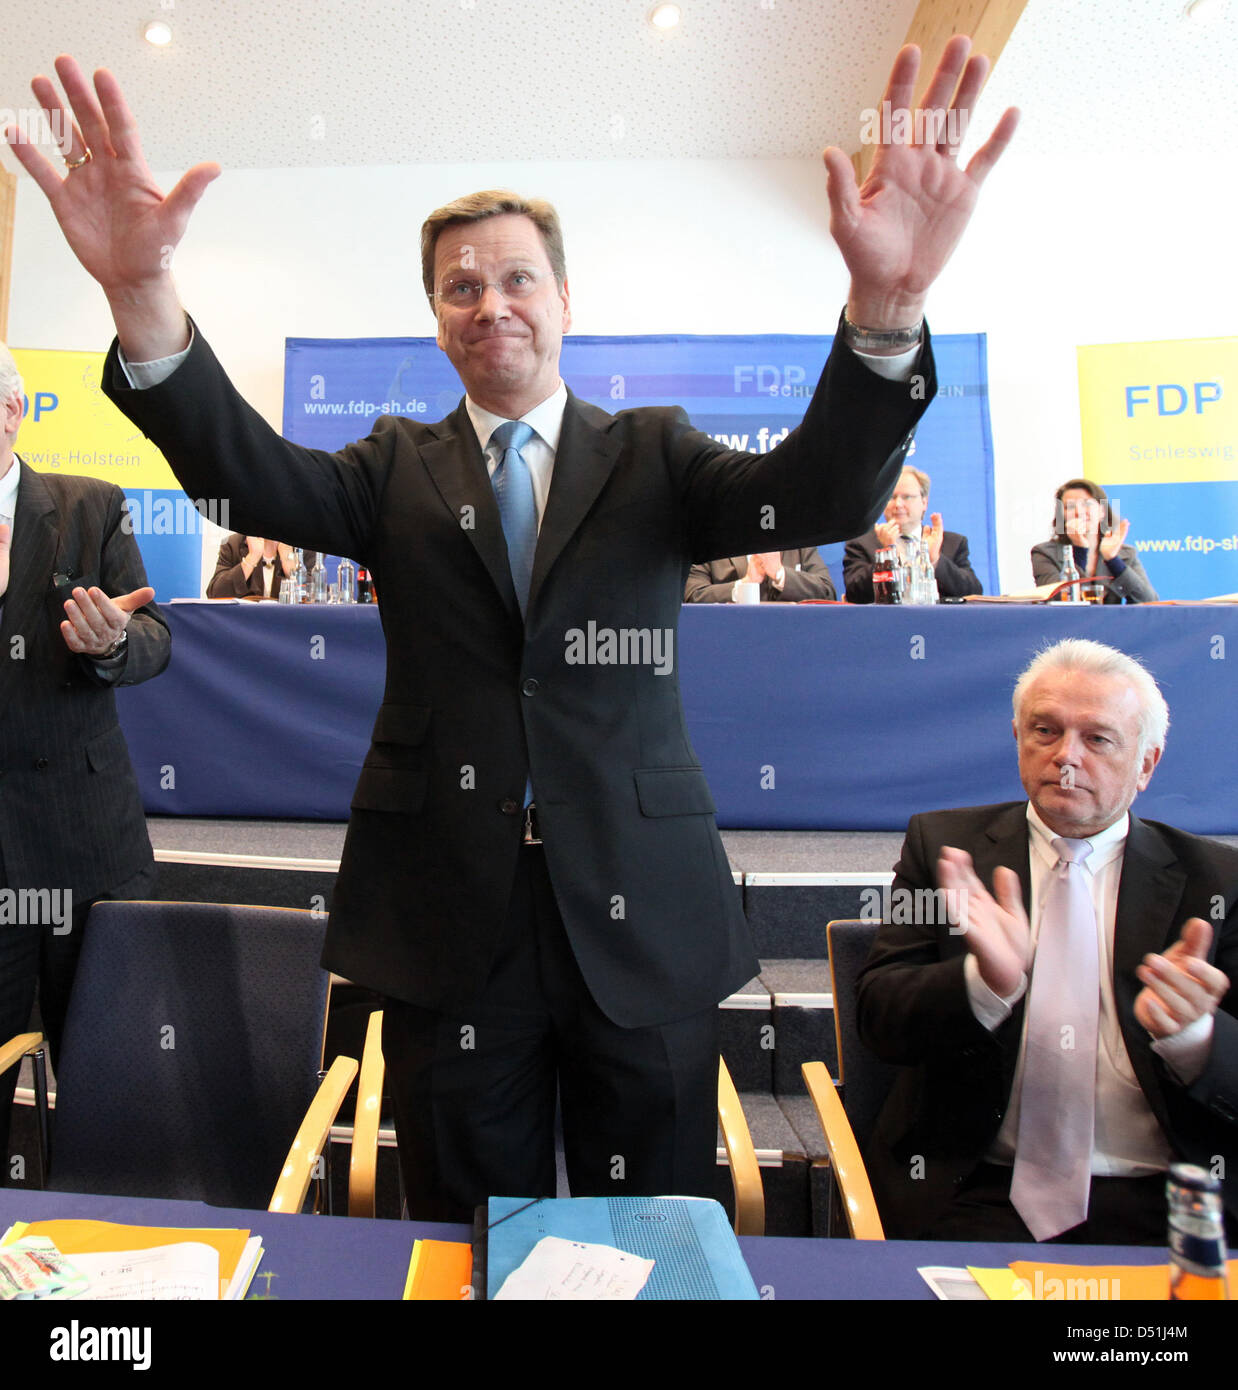 Free Democratic Party federal chairman and German Foreign Minister Guido Westerwelle (L) waves goodbye after having held a speech as the Free Democrats' parliamentary group chairman Wolfgang Kubicki applauds at a party convention of Schleswig-Holstein's FDP in Elmshorn, Germany, 06 November 2010. Mr Kubicki has expressed sympathy for Mr Westerwelle in light of his unflattering port Stock Photo